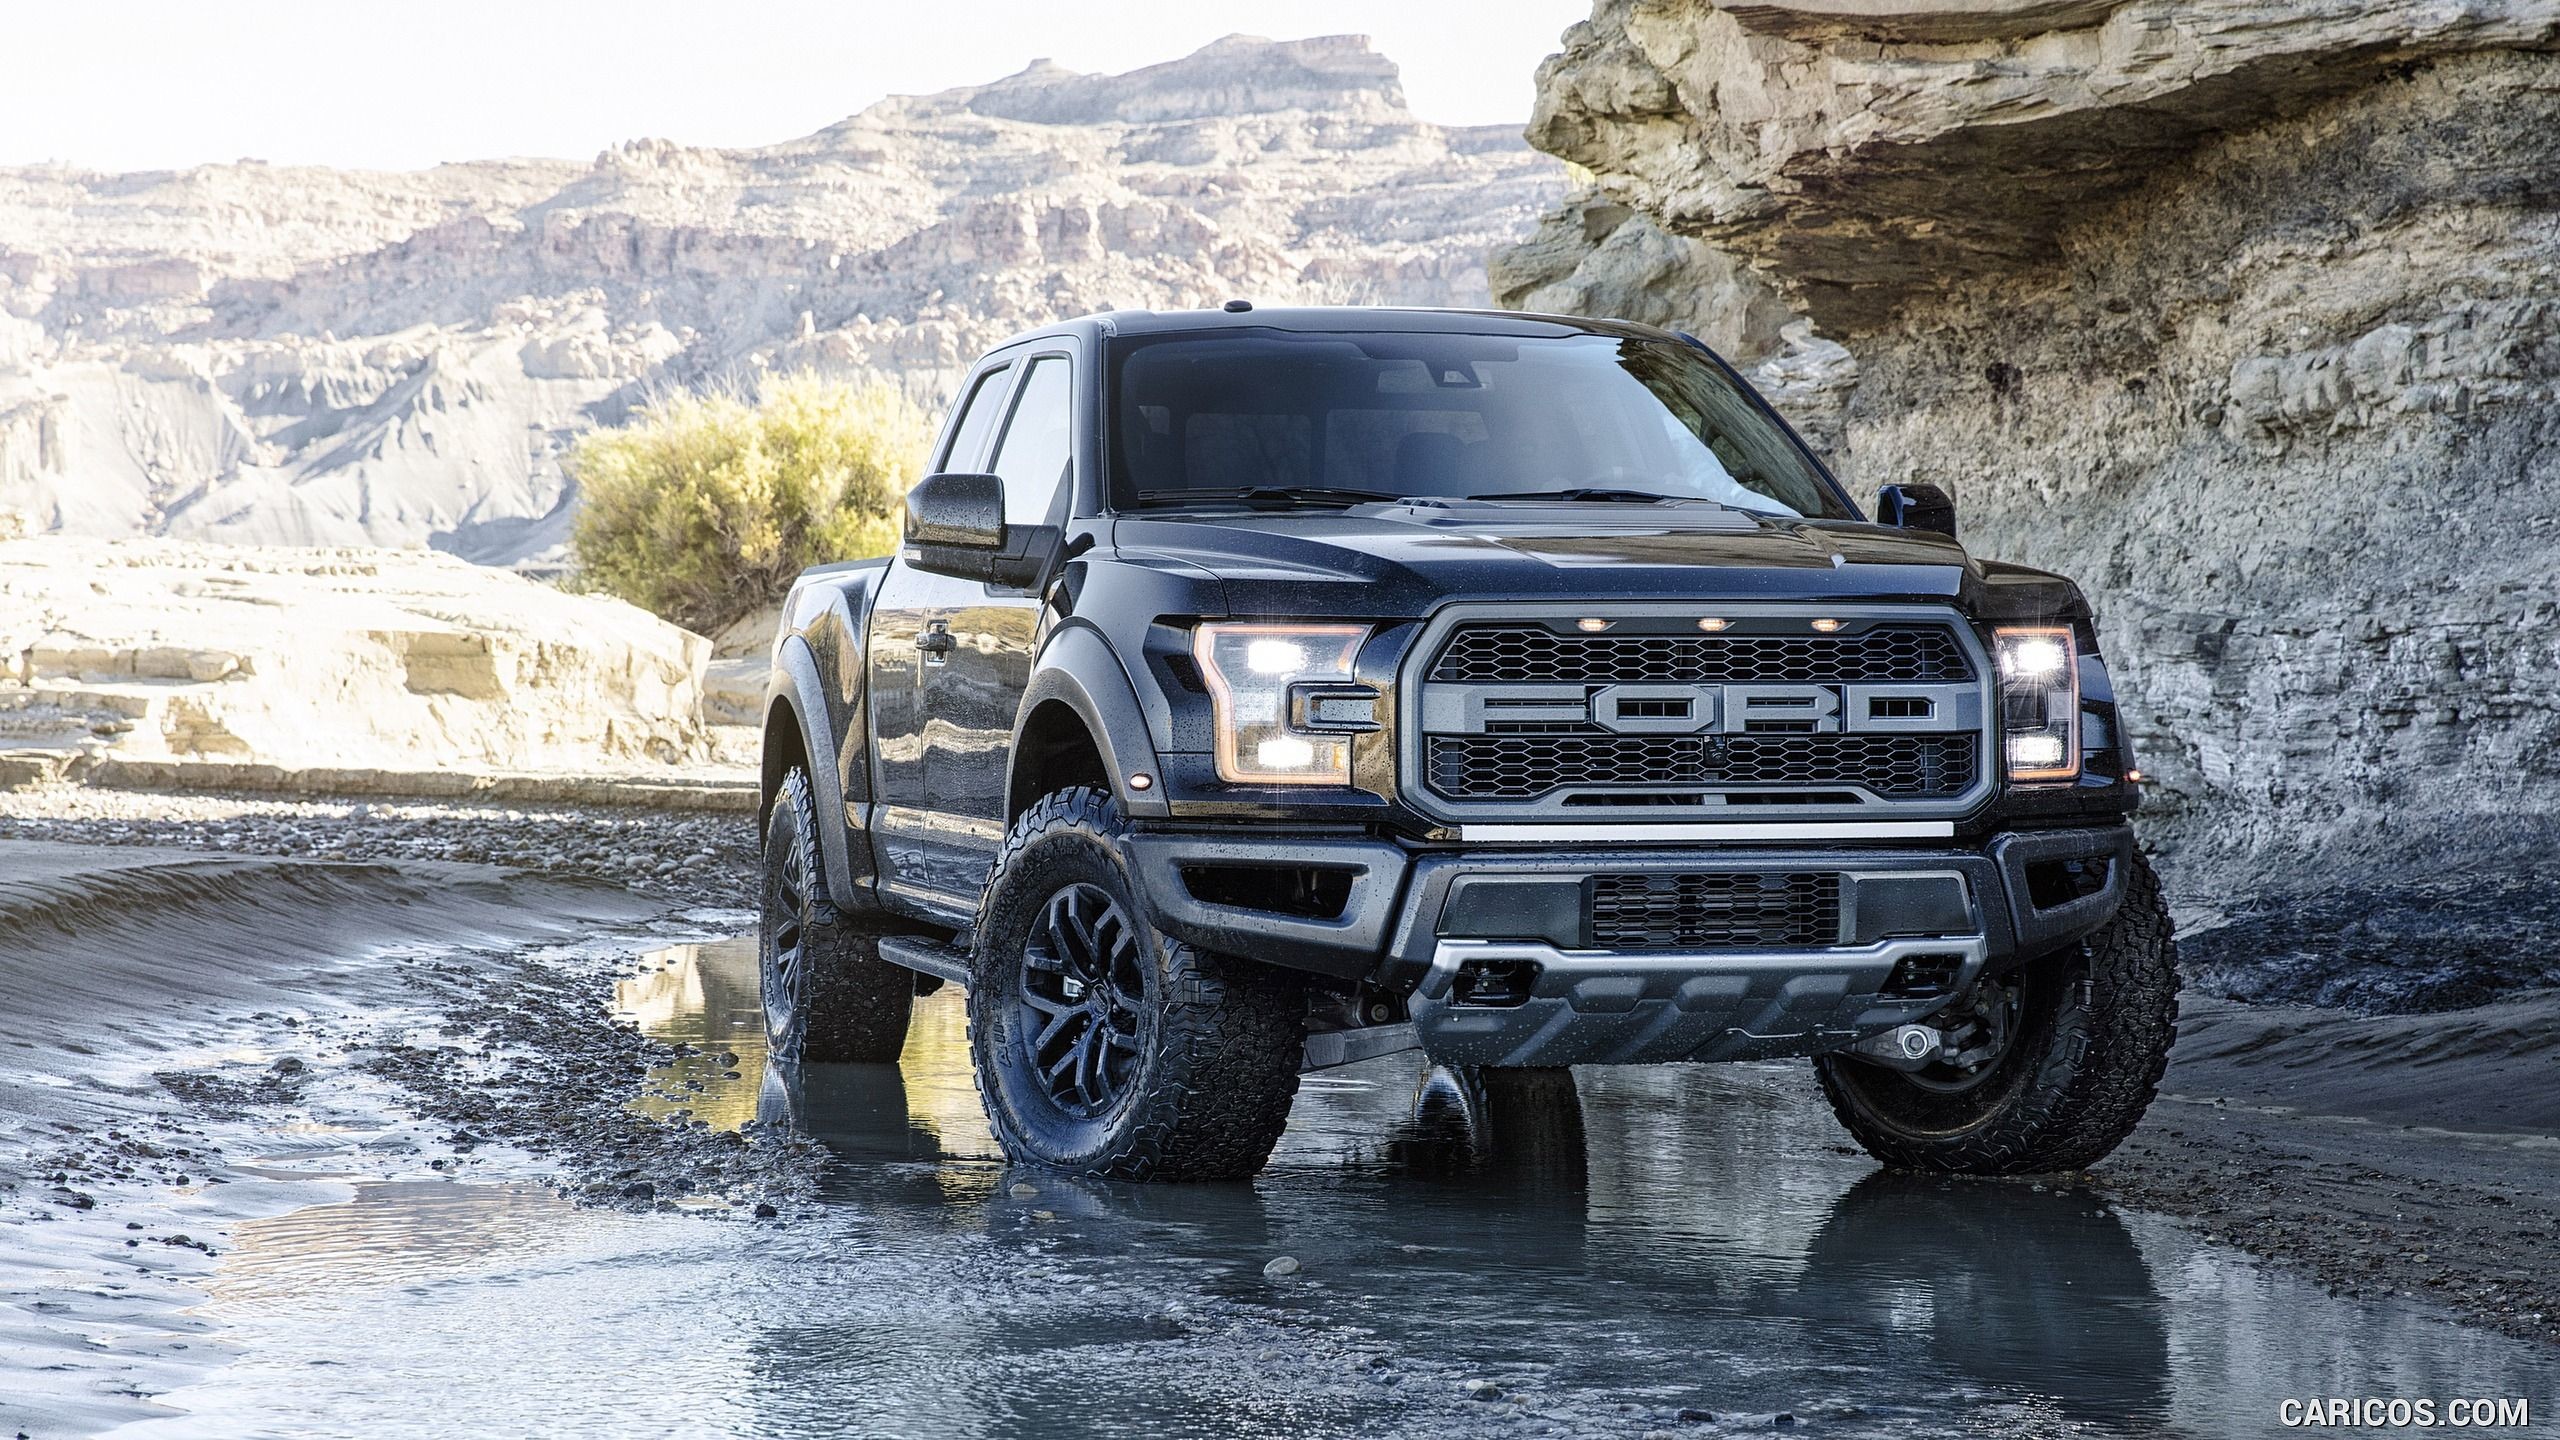 2018 Ford F 150 Wallpaper (60+ images)